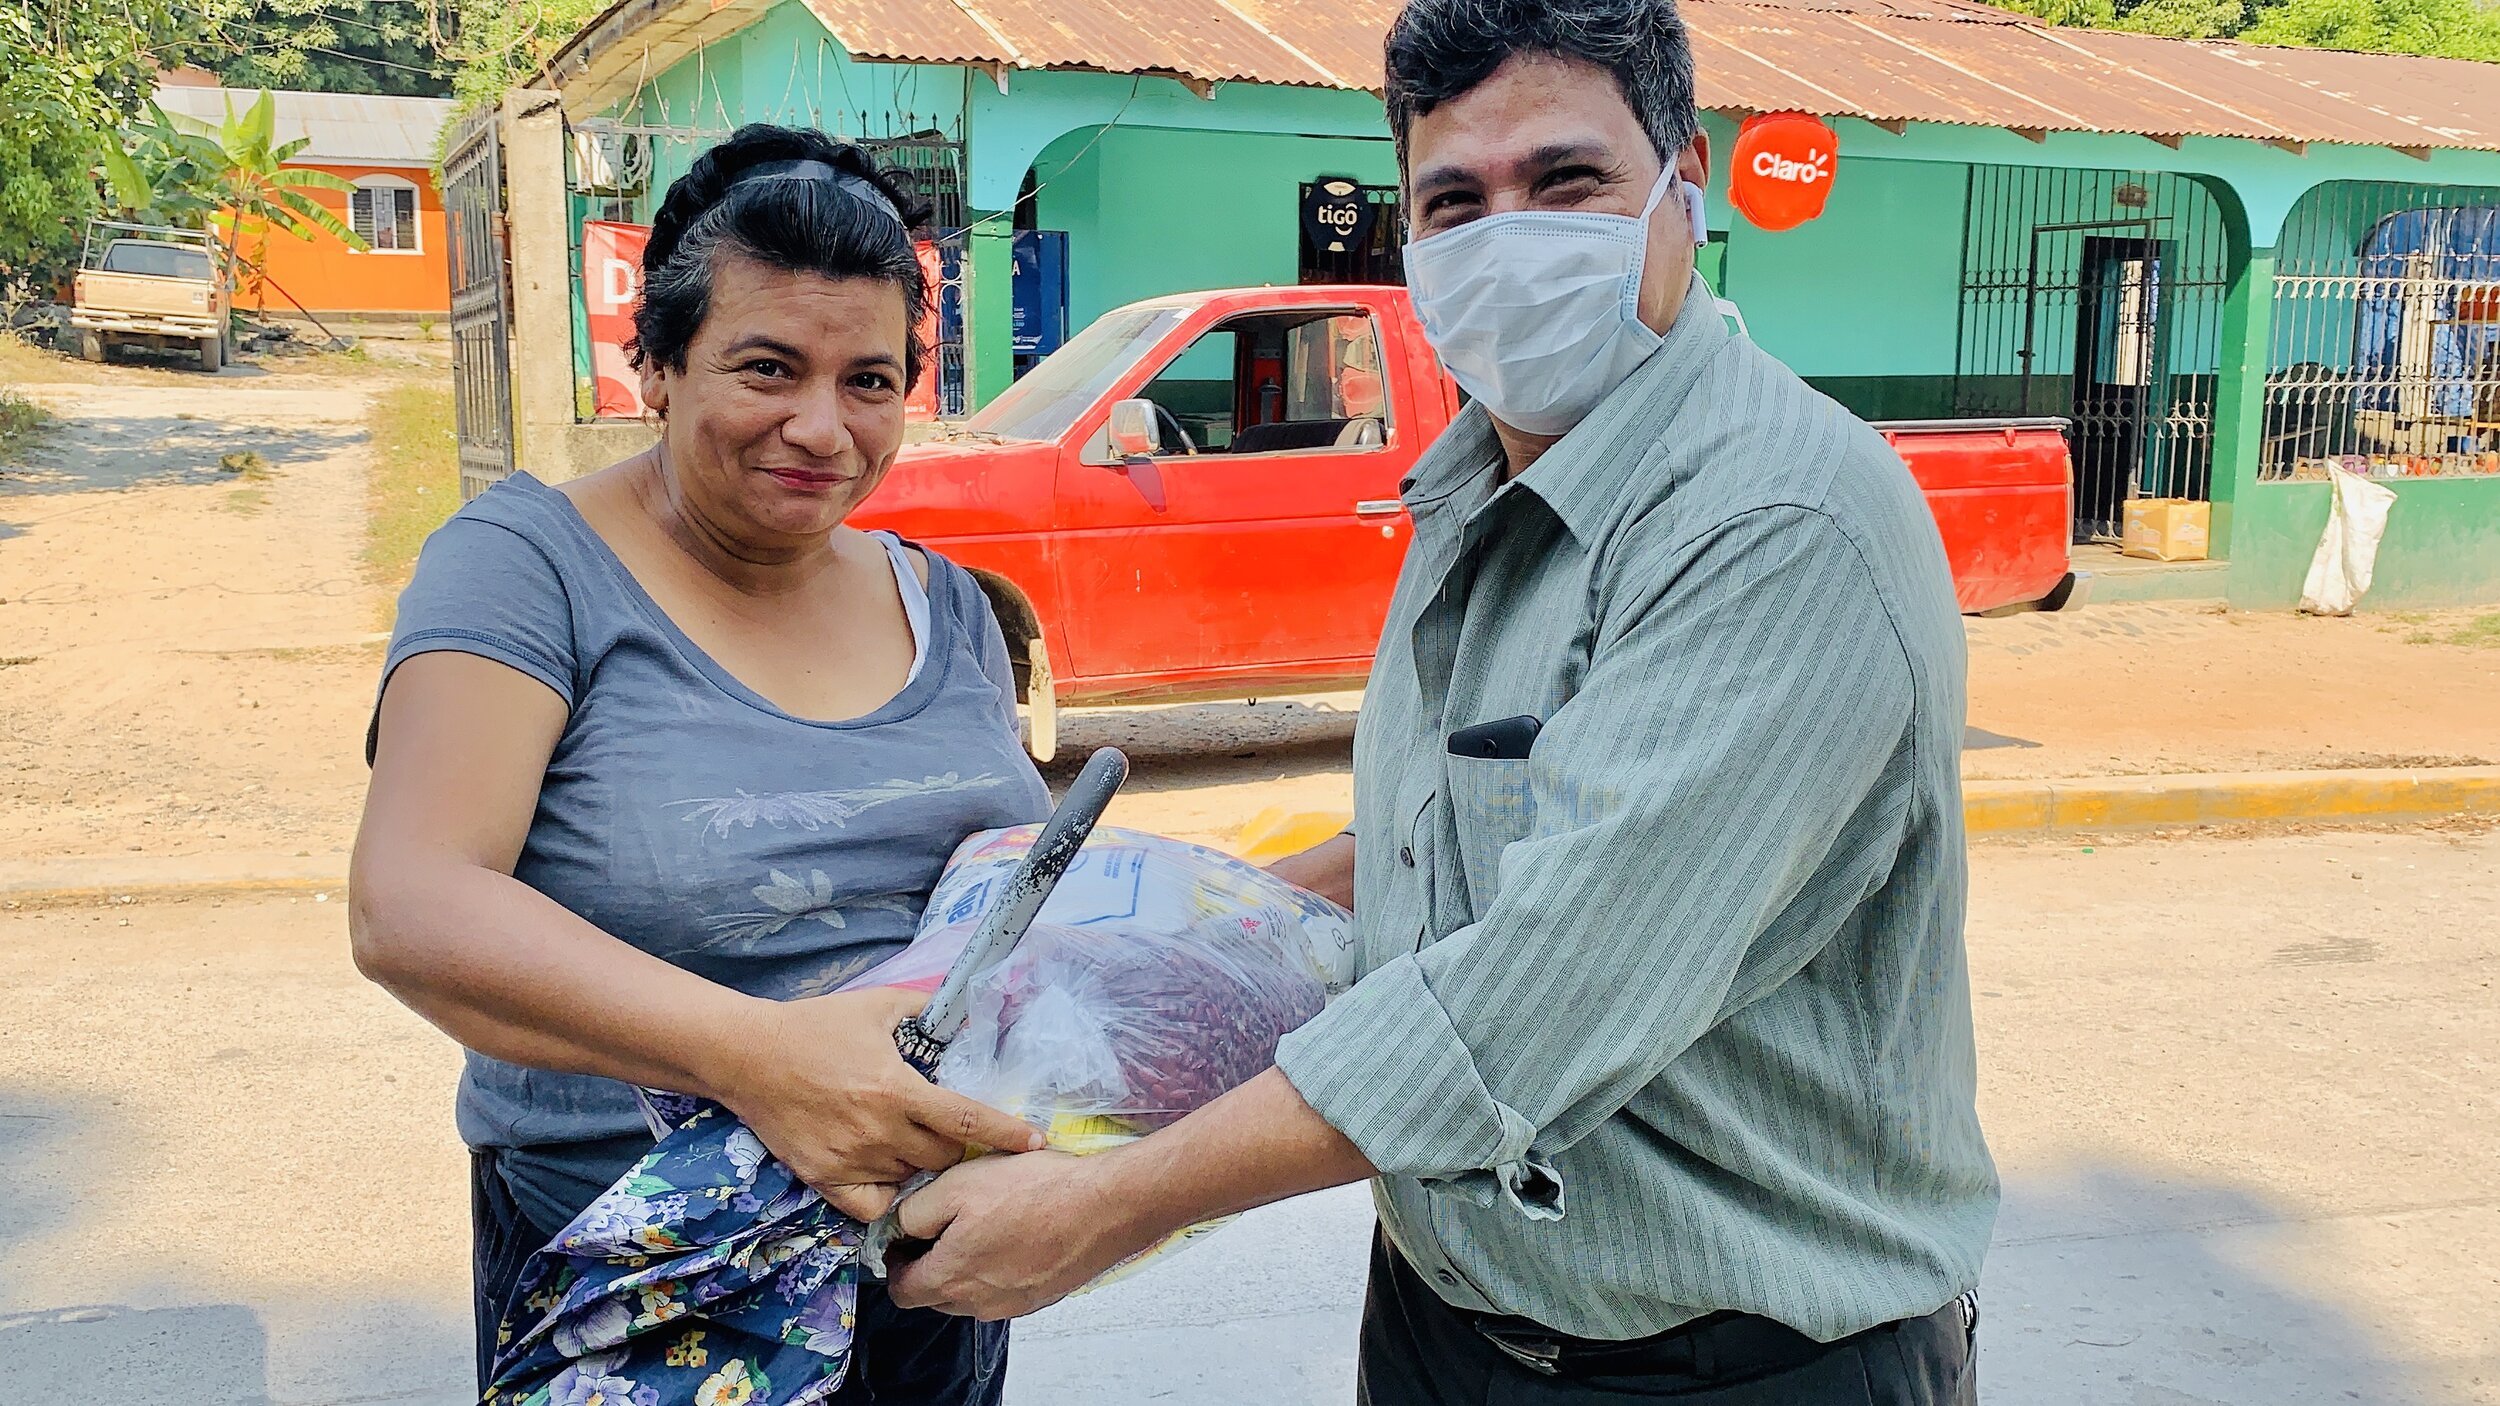 Pastor Melvin a CCI Church Planter donating Meal Kits during the COVID-19 emergency response in Honduras